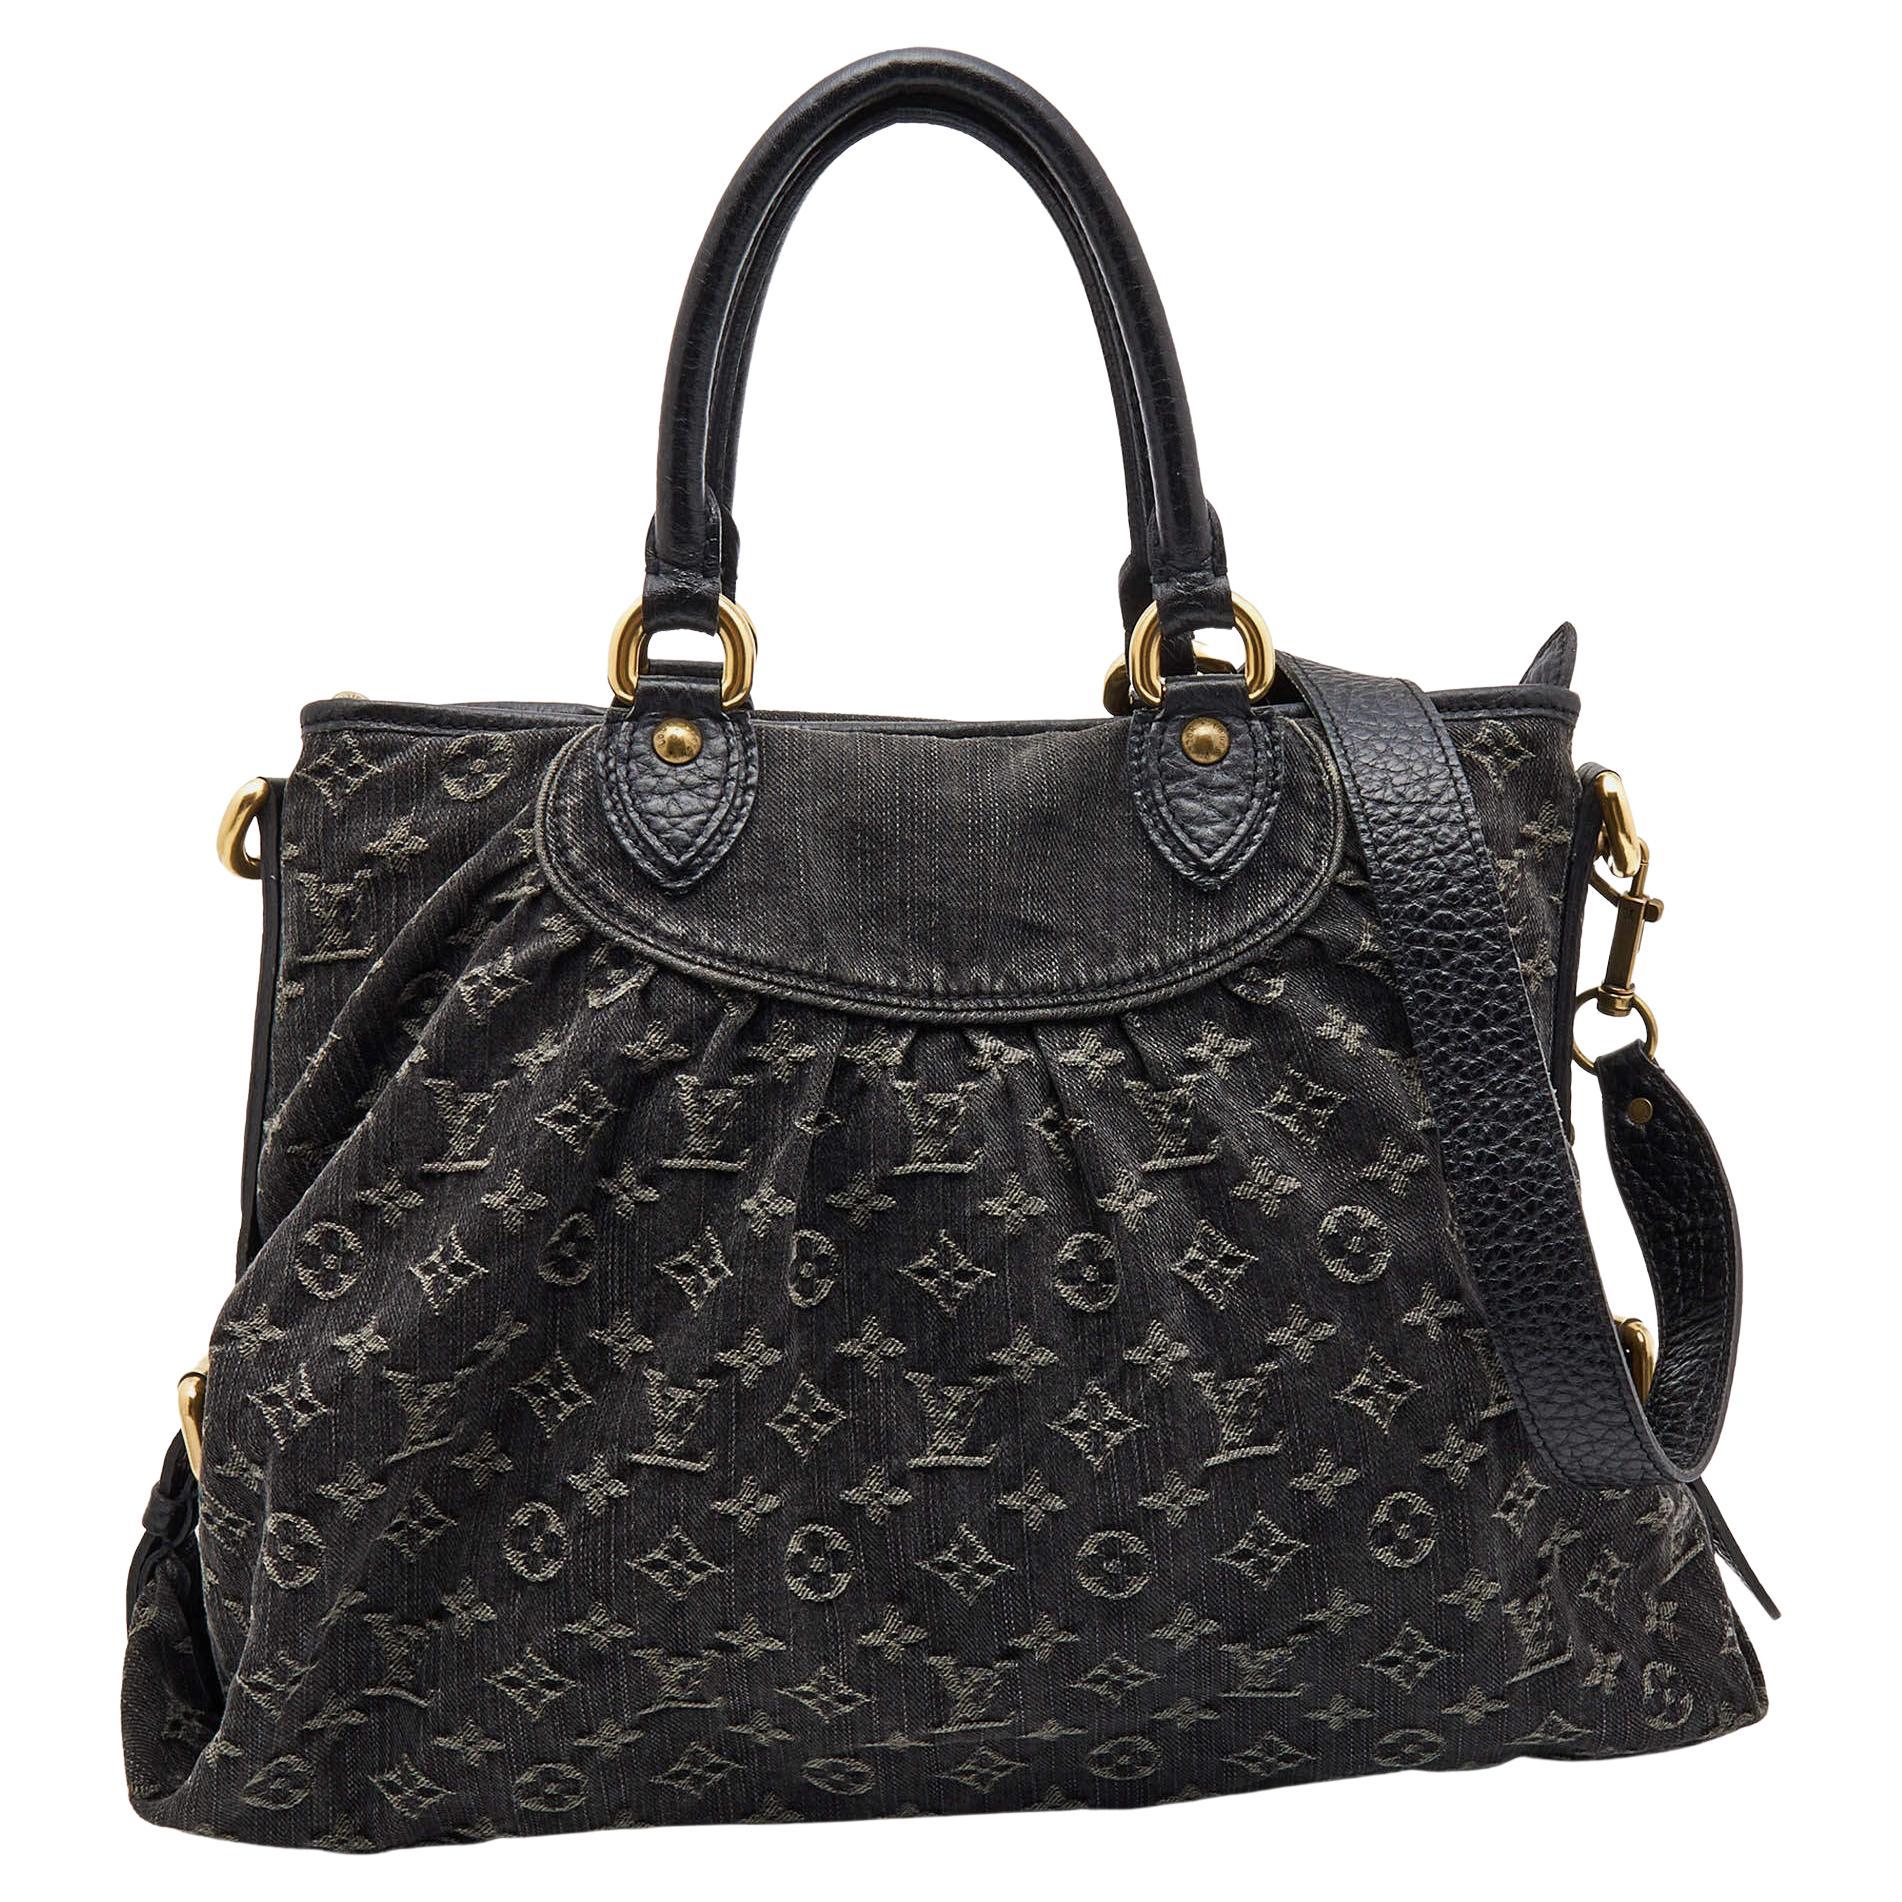 Louis Vuitton Black Monogram Denim and Leather Neo Cabby GM Bag